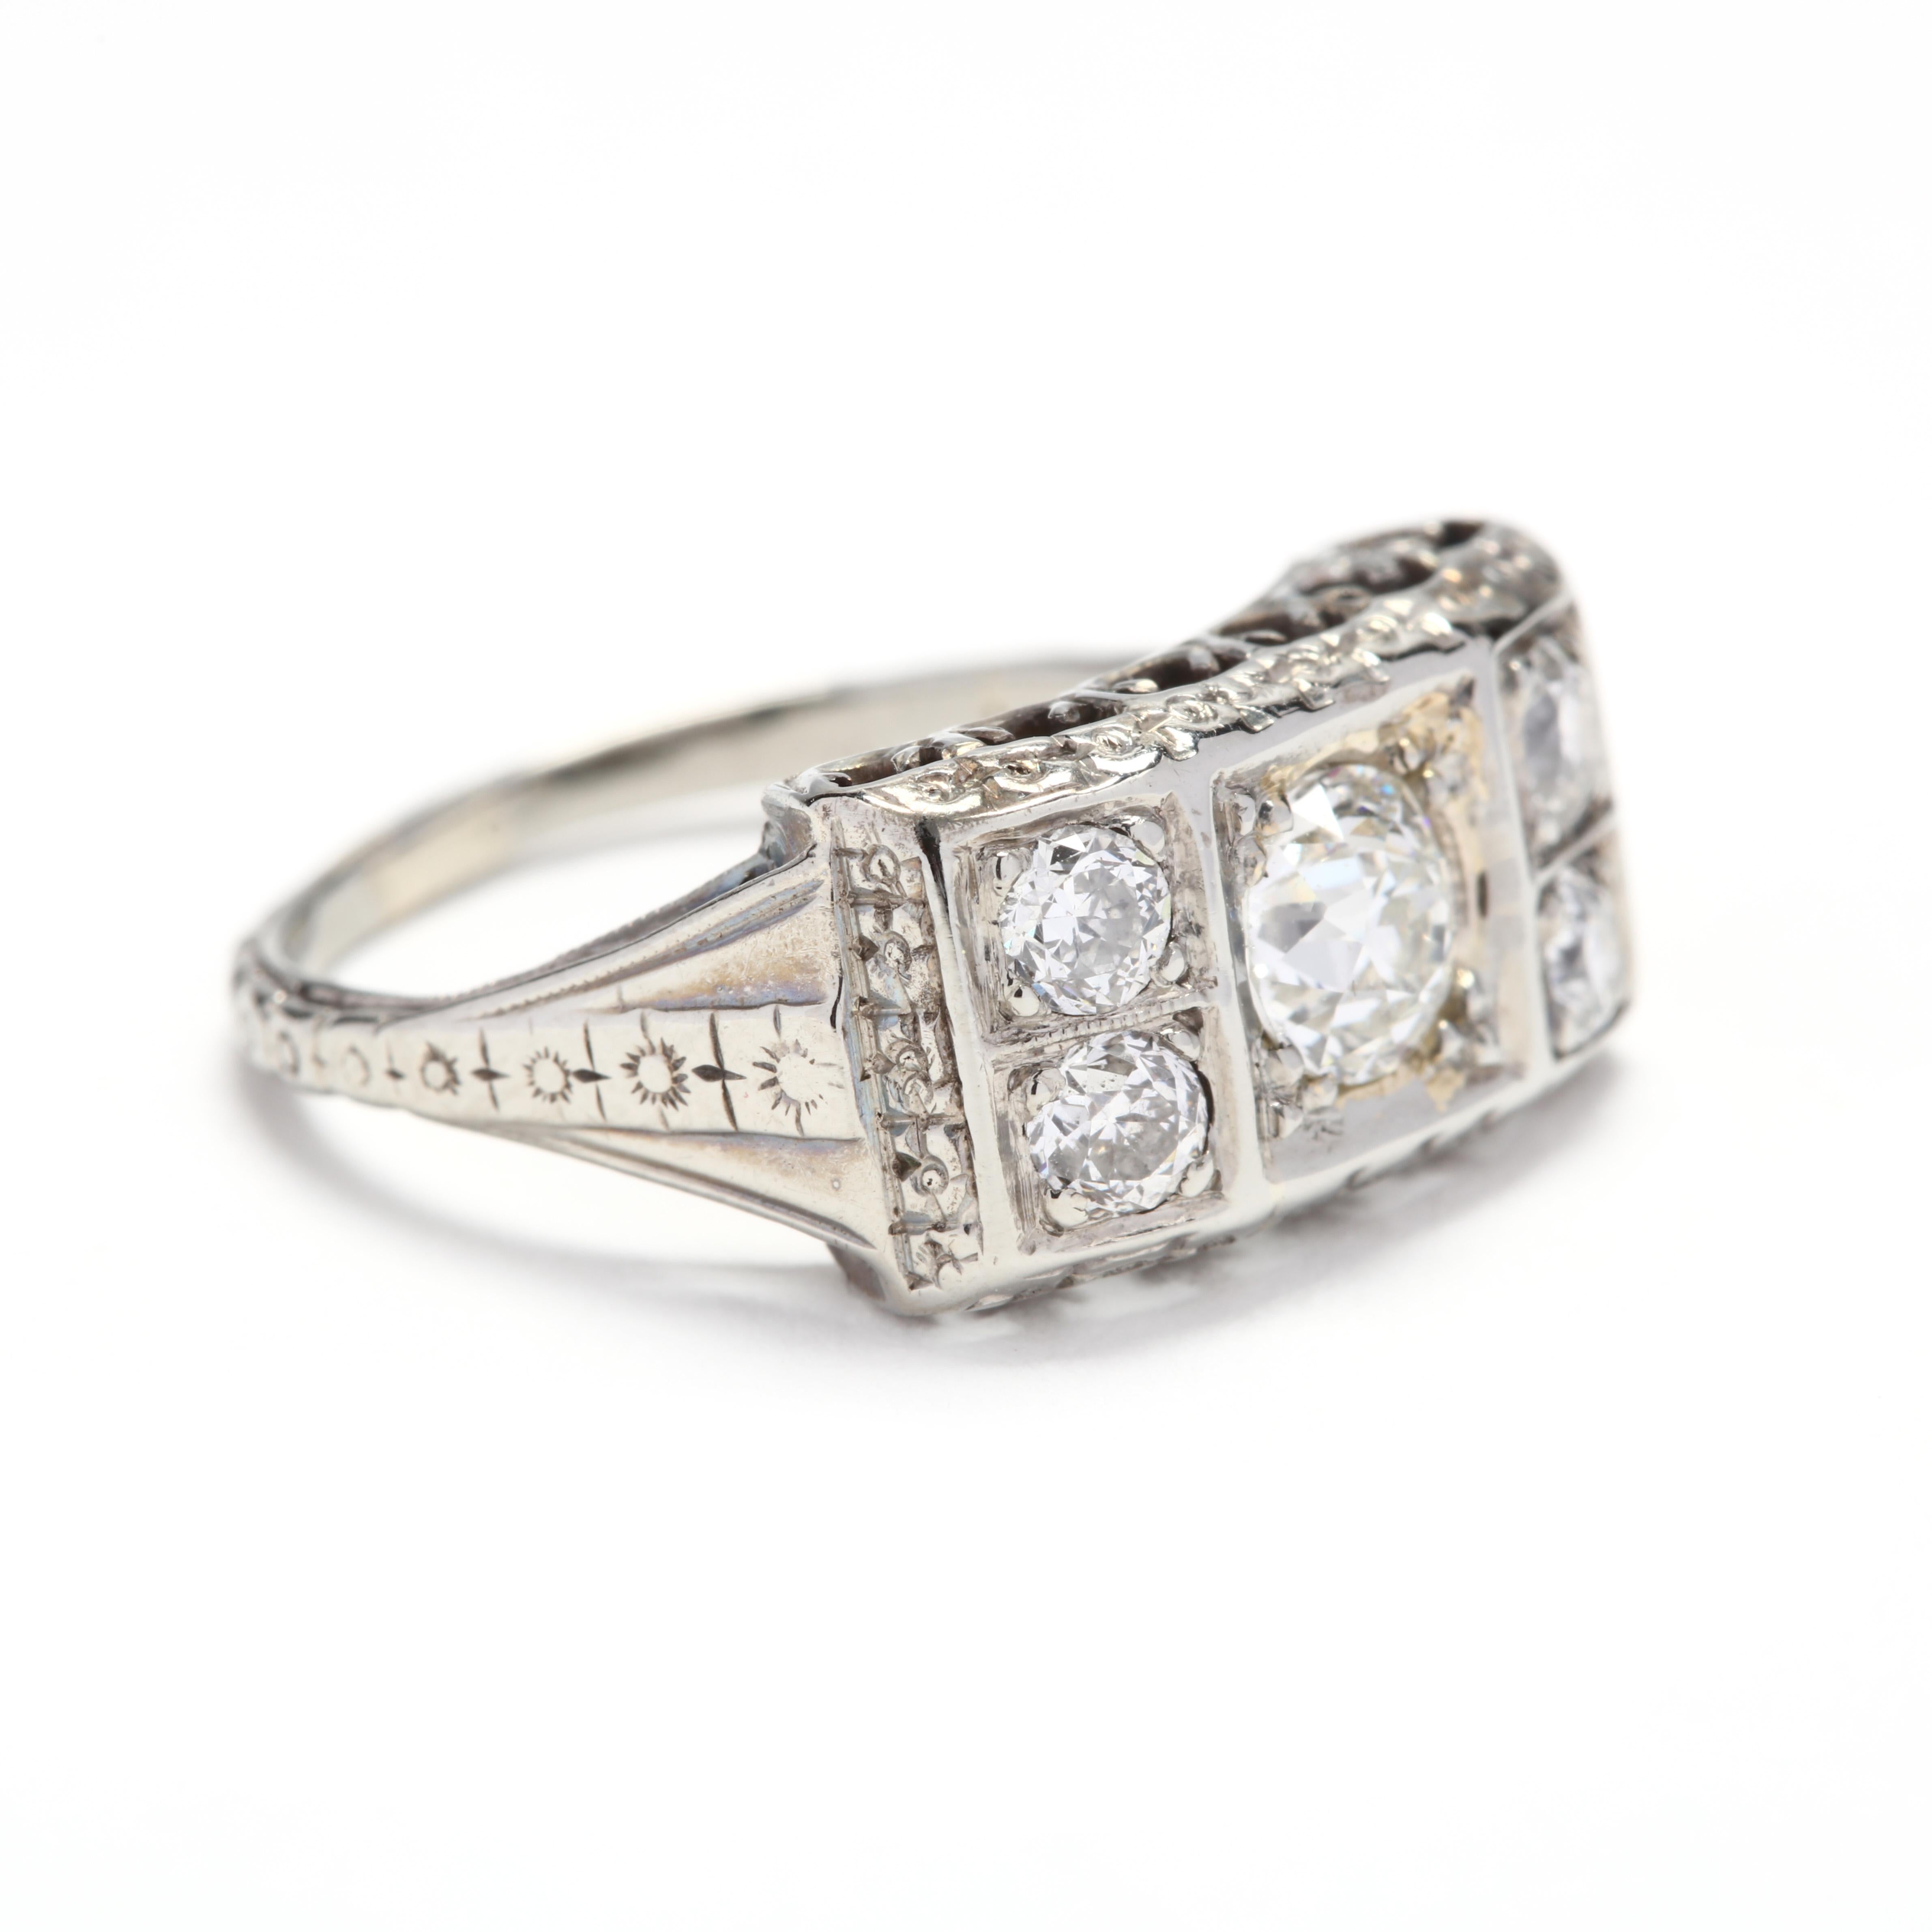 Art Deco 18 karat white gold horizontal, rectangular ring with a bead set old european cut diamond center stone weighing .54 carat, with two old european cut diamonds on either side and orange blossom floral engraving.

Center Diamond
- old european